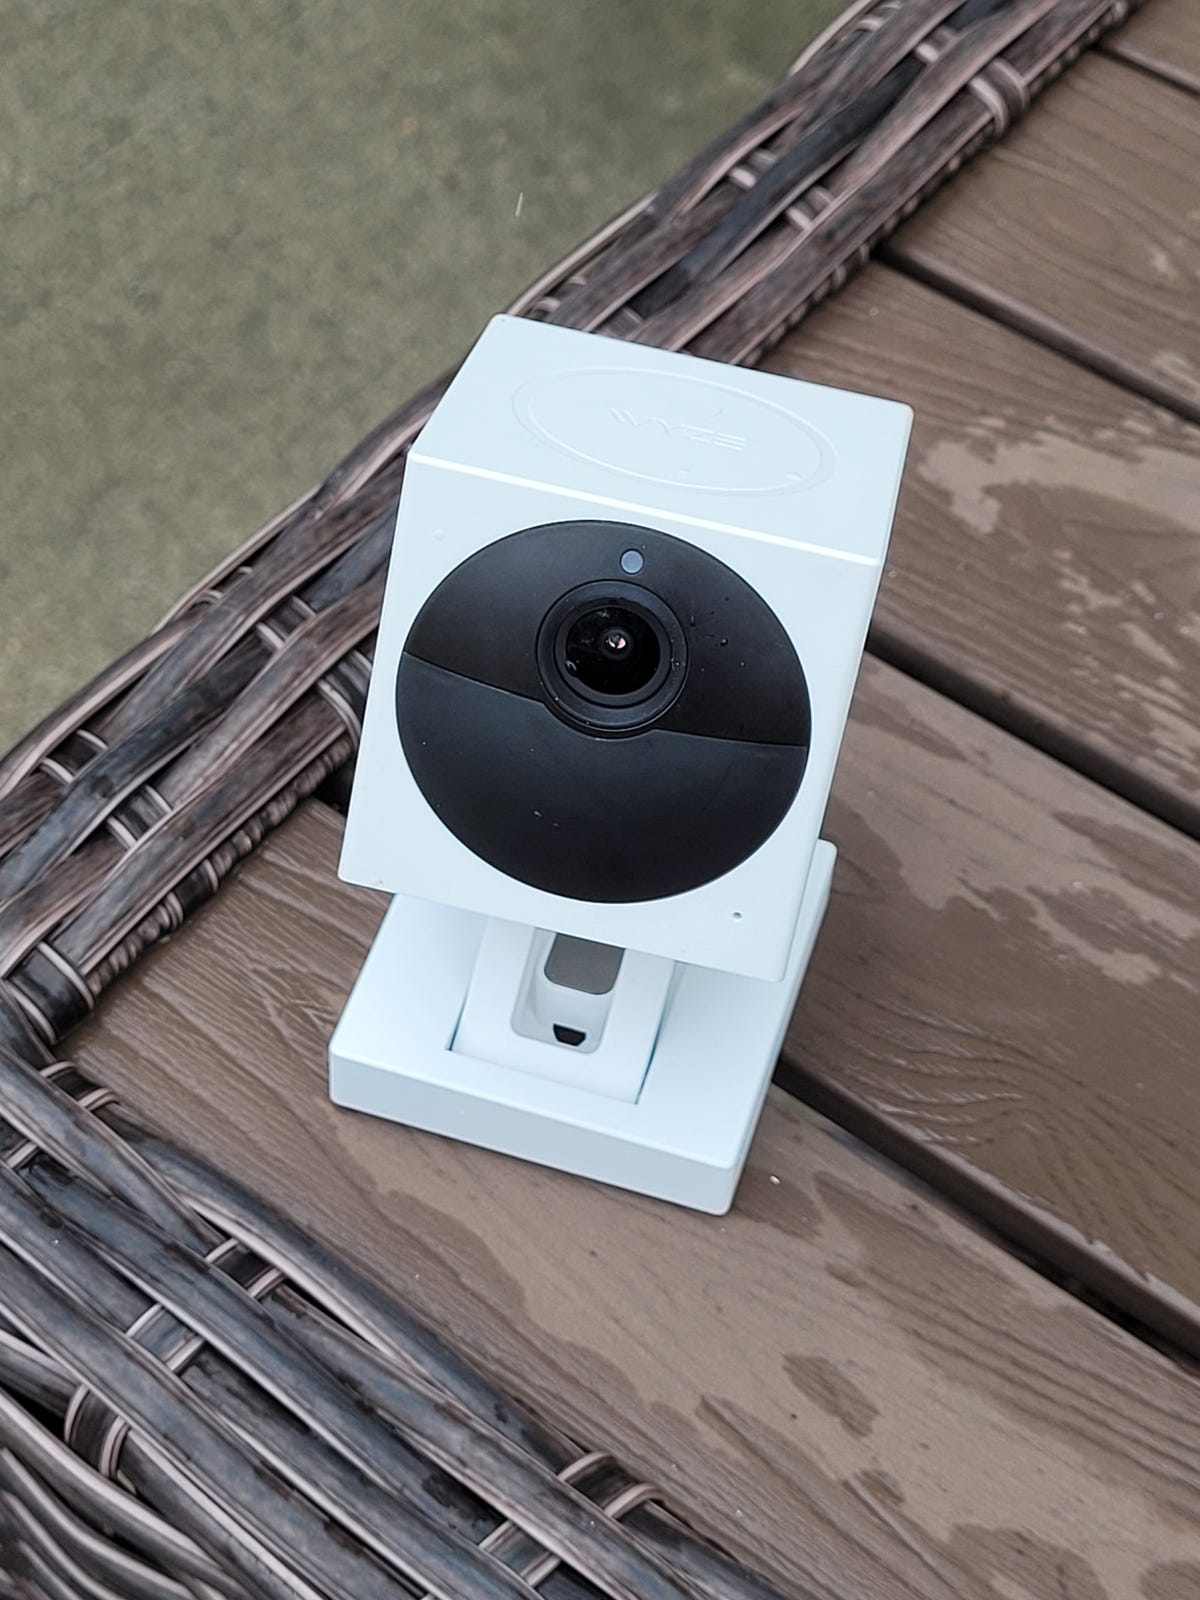 Wyze Cam Outdoor security camera placed on a table